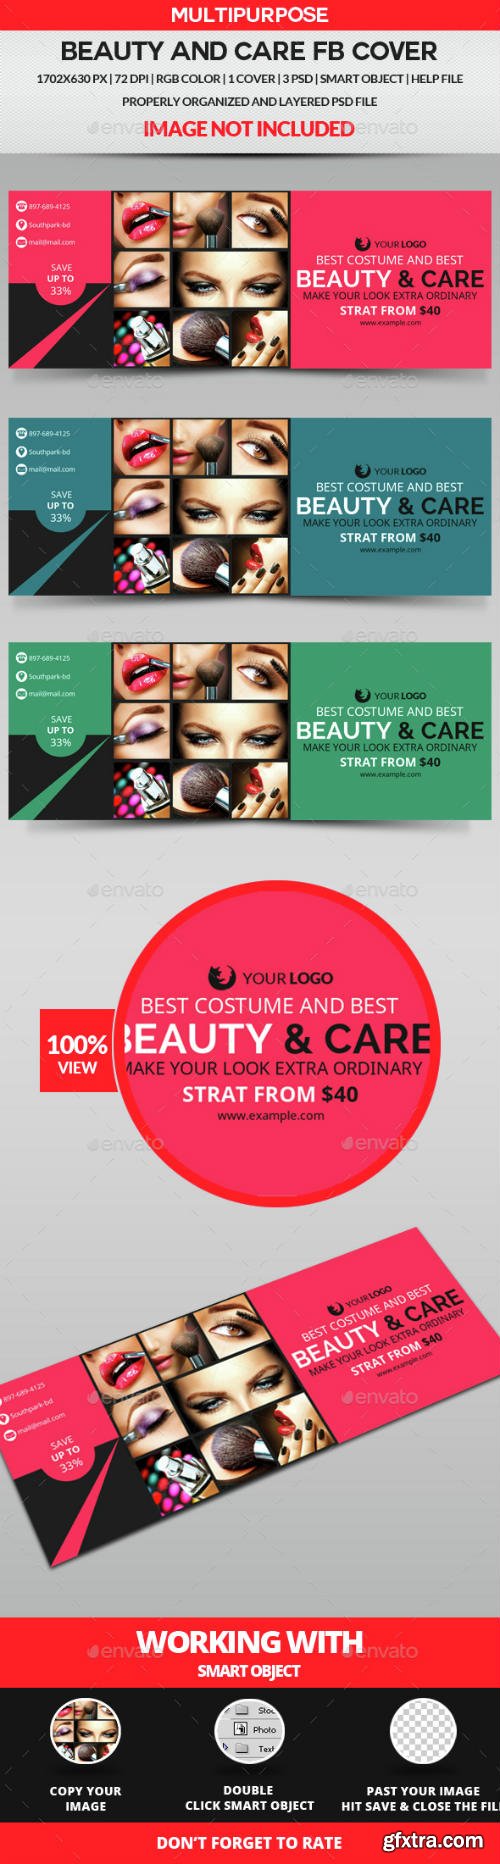 GR - Beauty & Care Facebook Cover 14952279